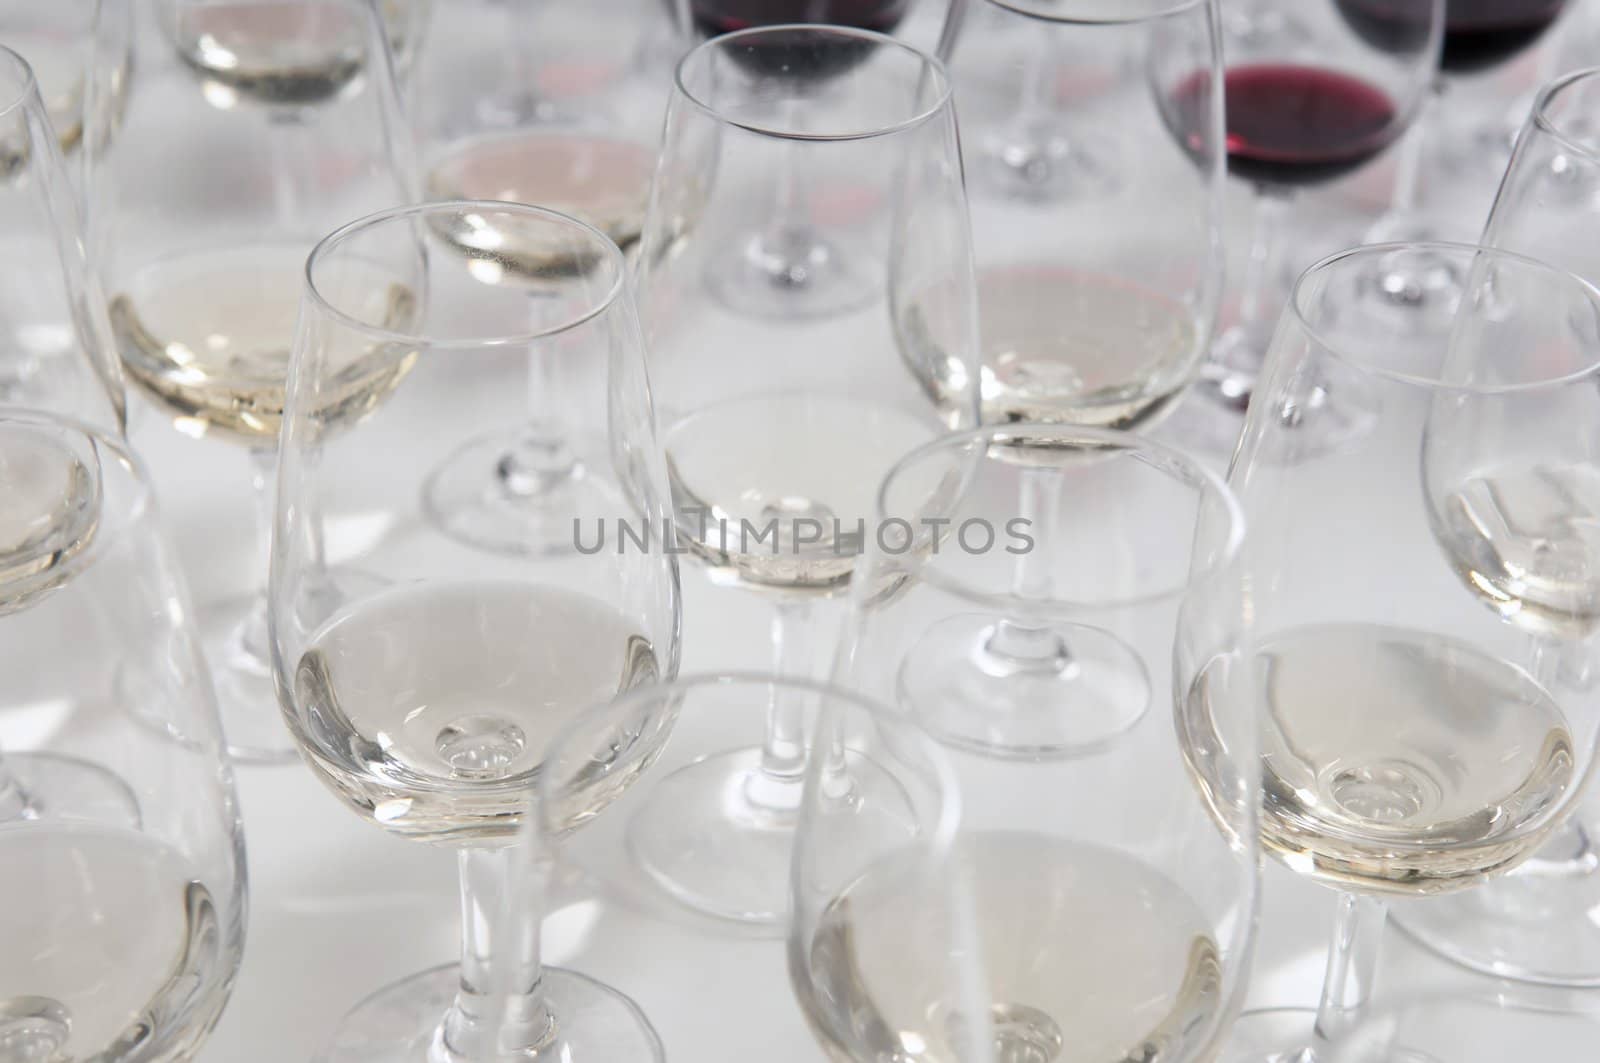 Winetasting glasses aligned for a taste of red and white wines